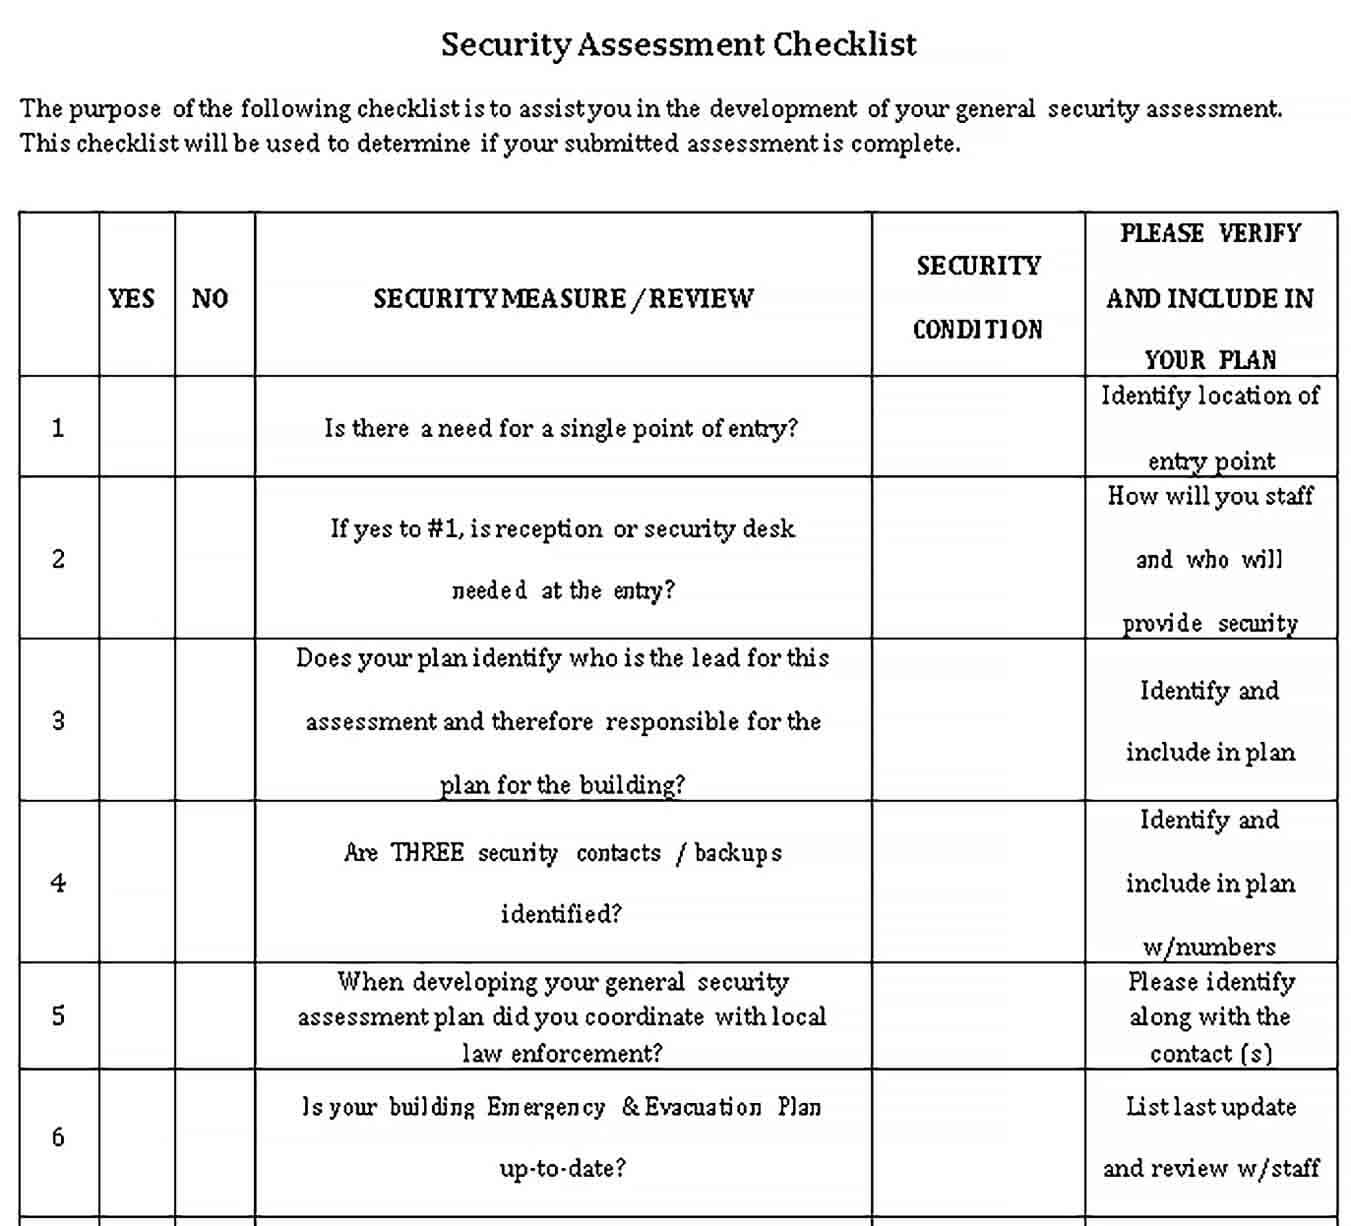 Security Assessment Checklist Template  Pertaining To Security Assessment Checklist Template With Regard To Security Assessment Checklist Template